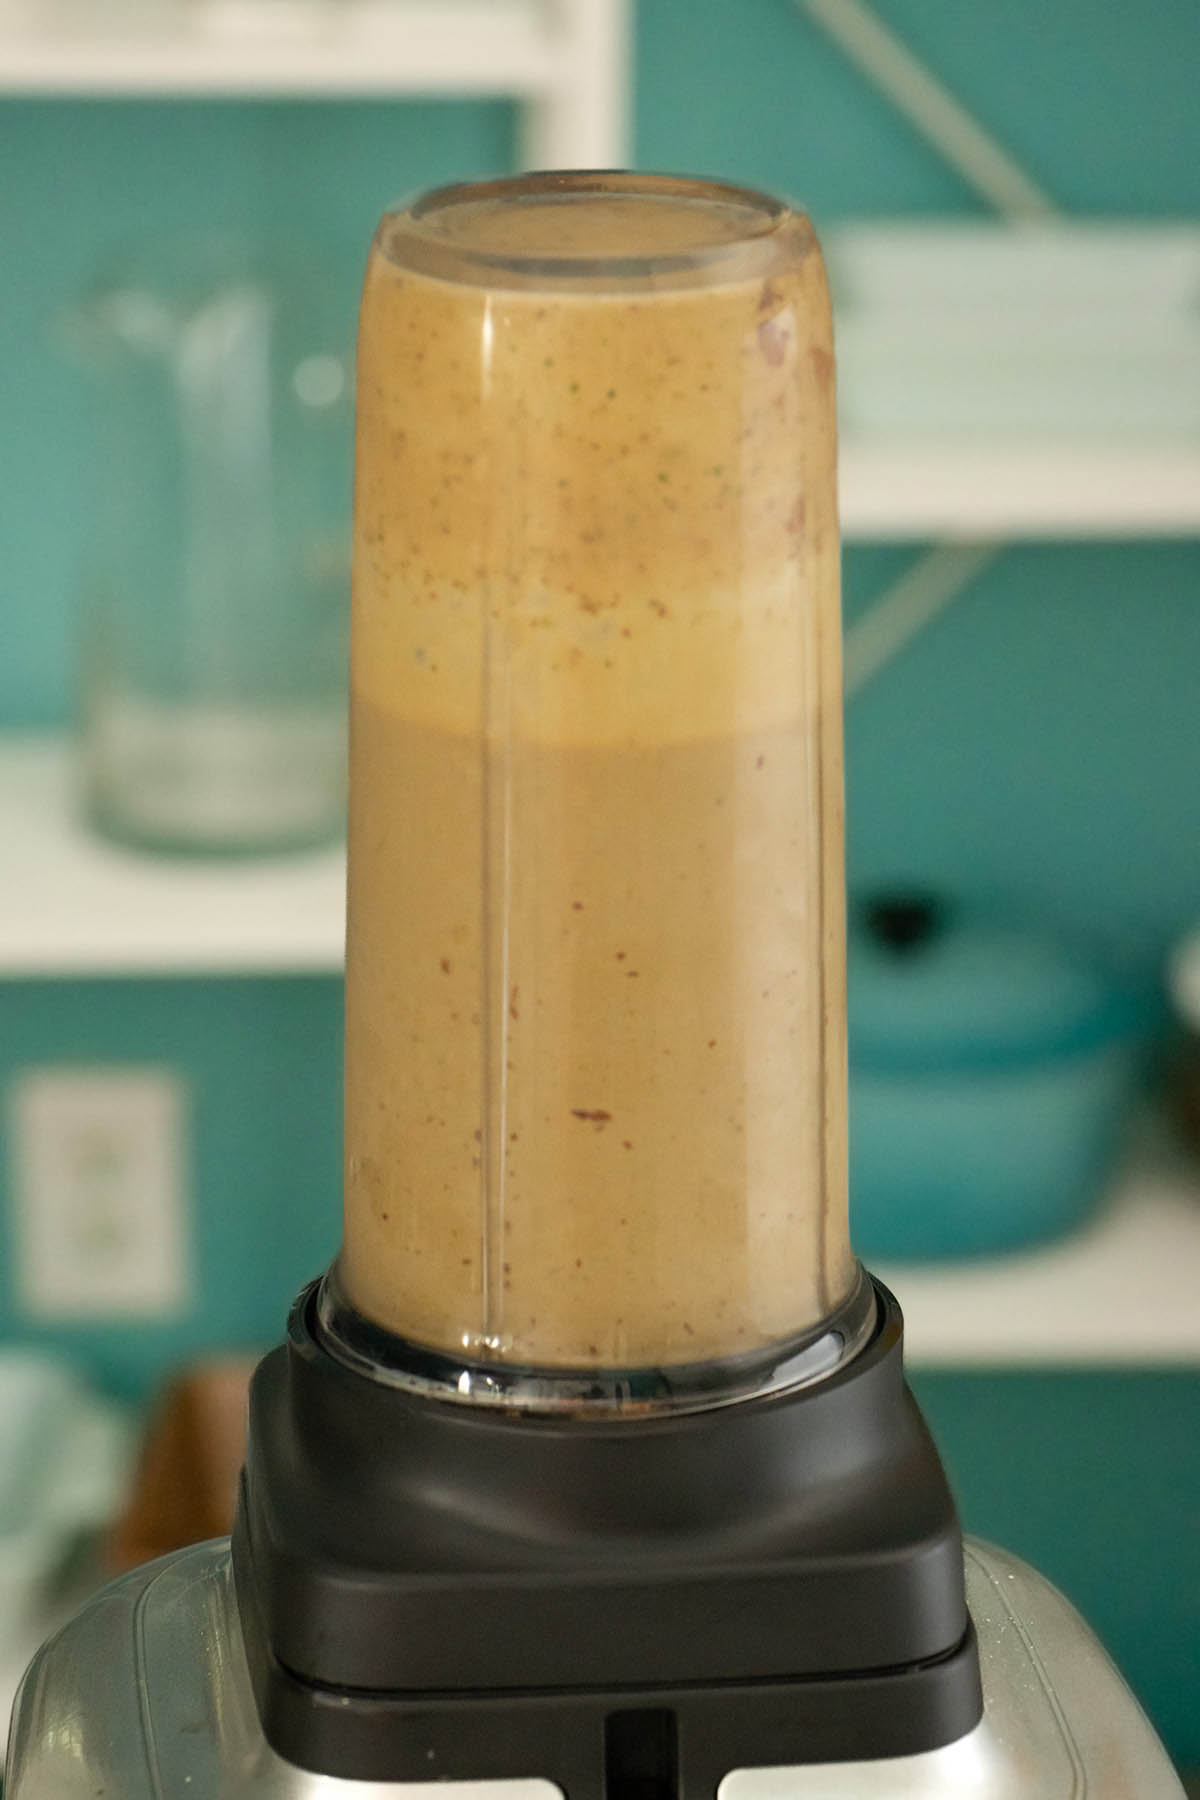 chocolate green smoothie in the blender after blending